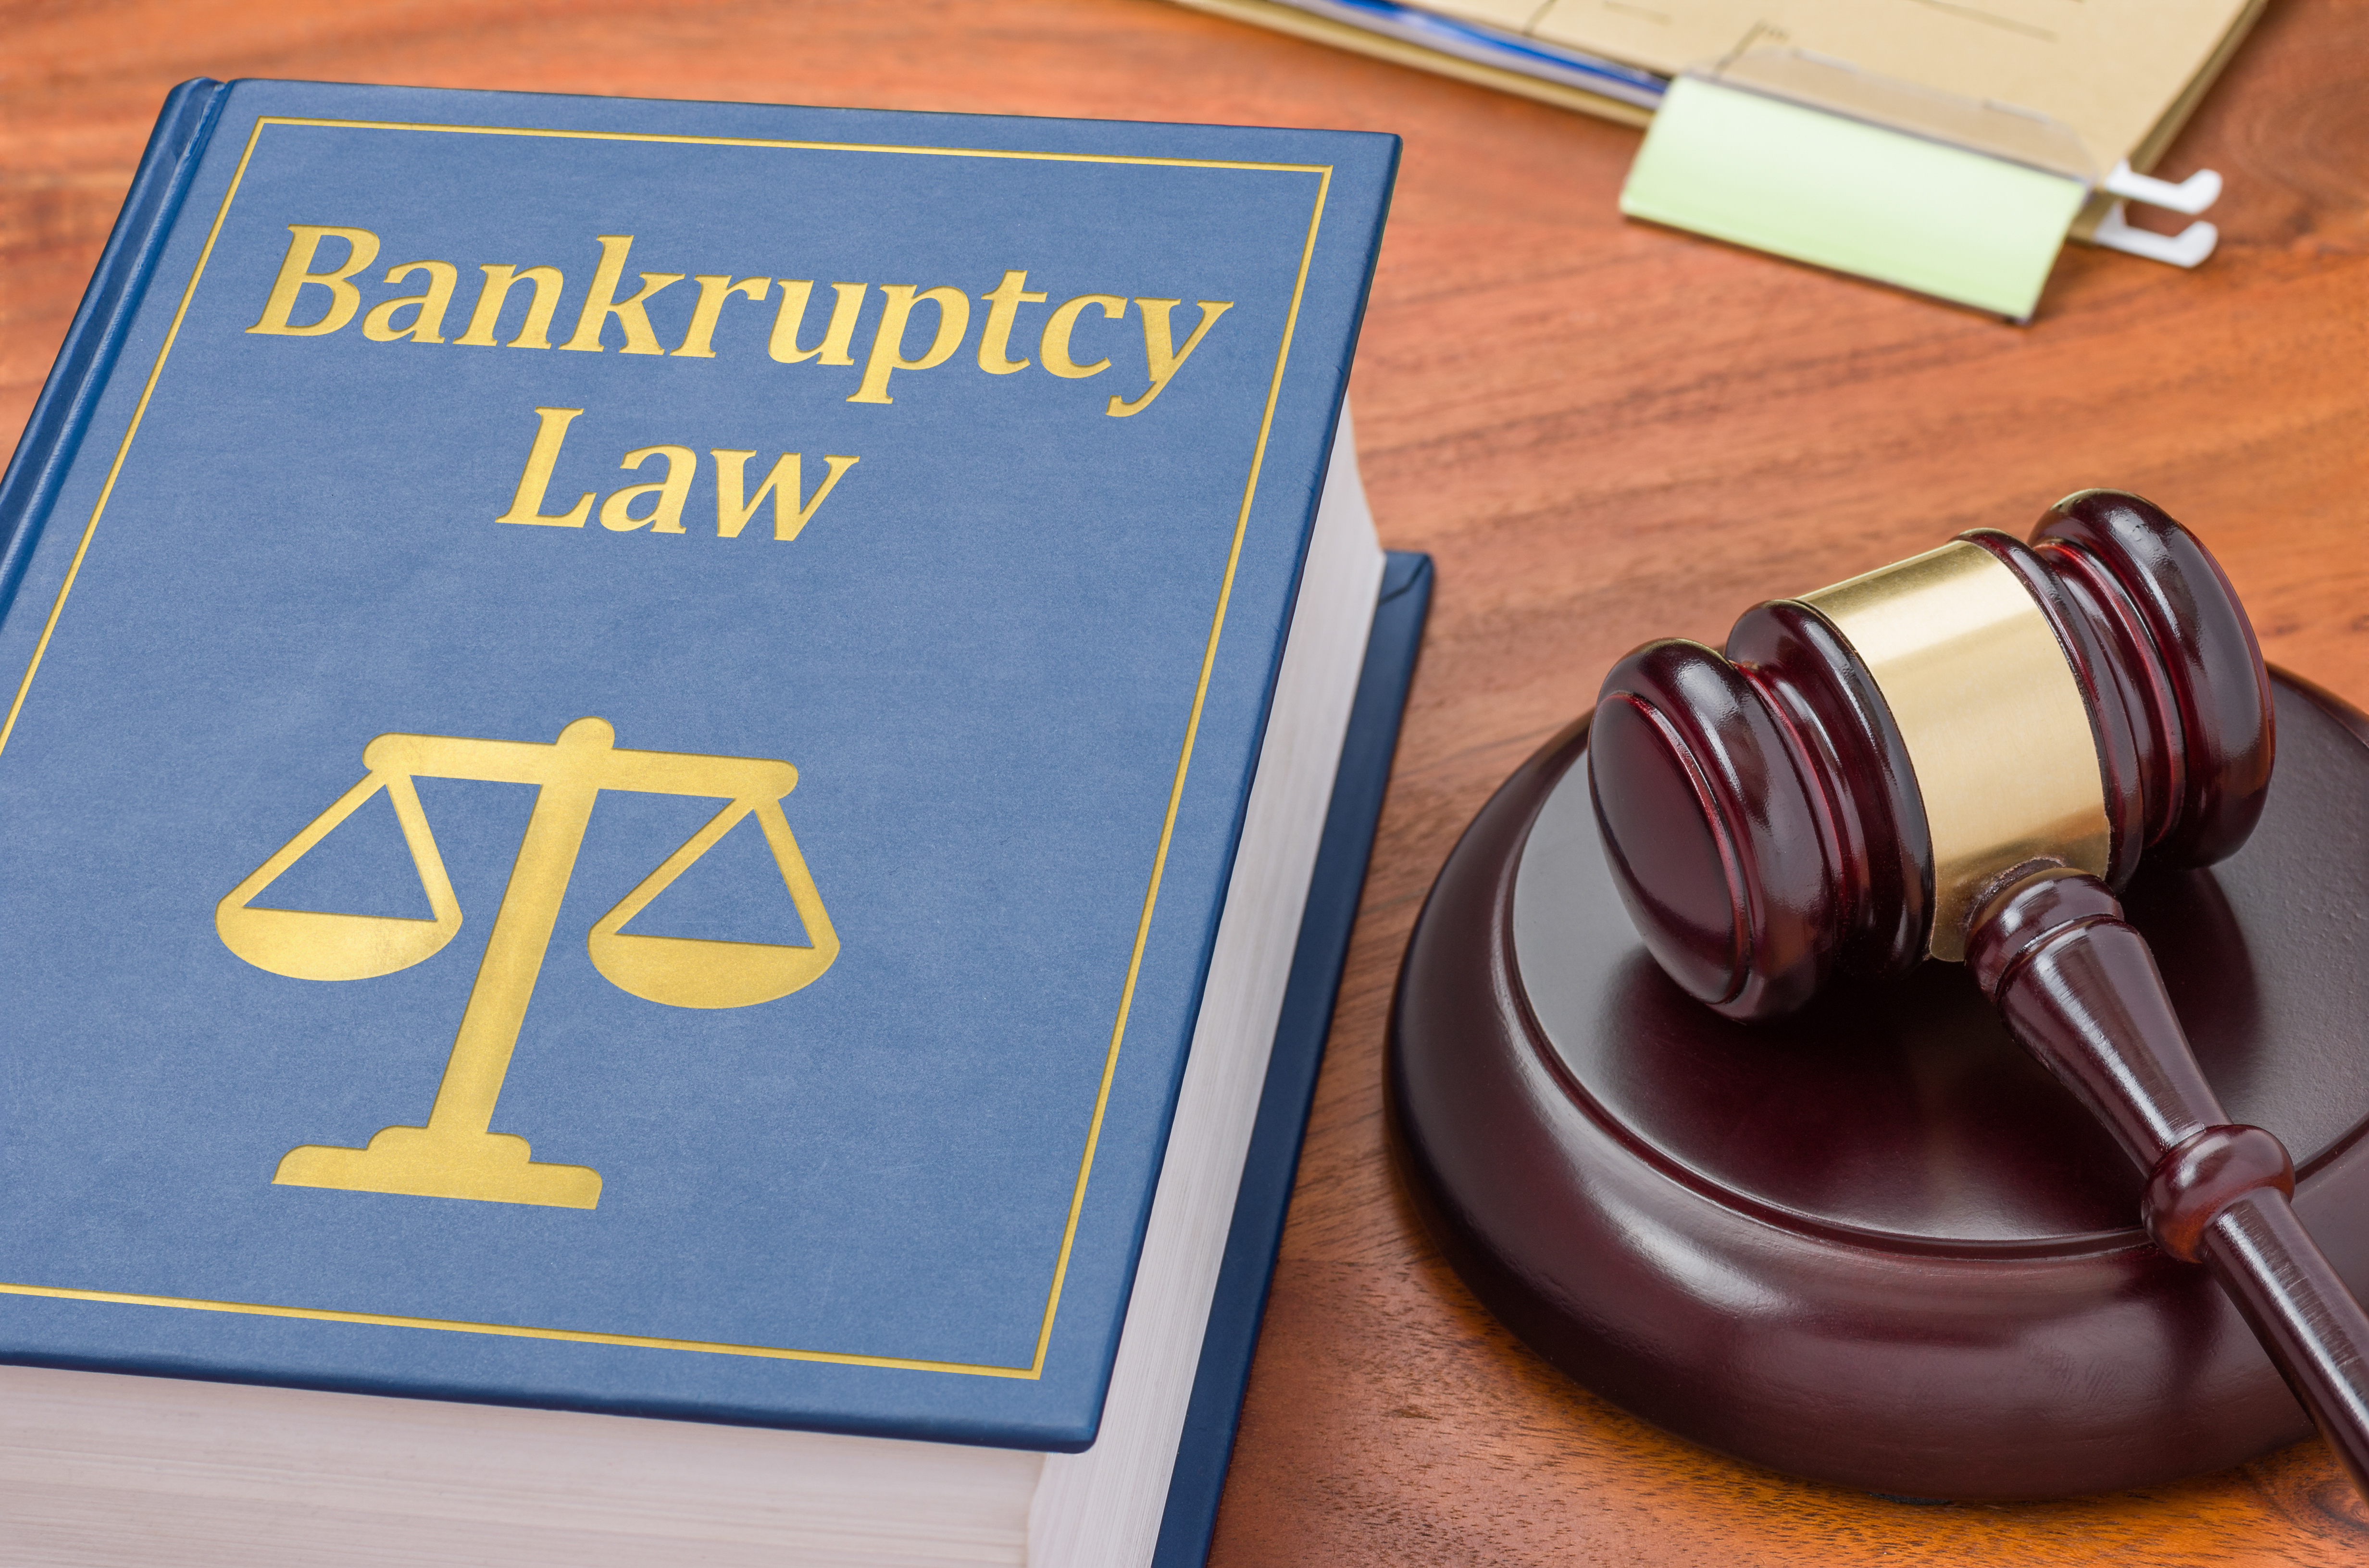 Nevada Bankruptcy Attorneys Price Law Group Call 866-210-1722 To File For Chapter 7 